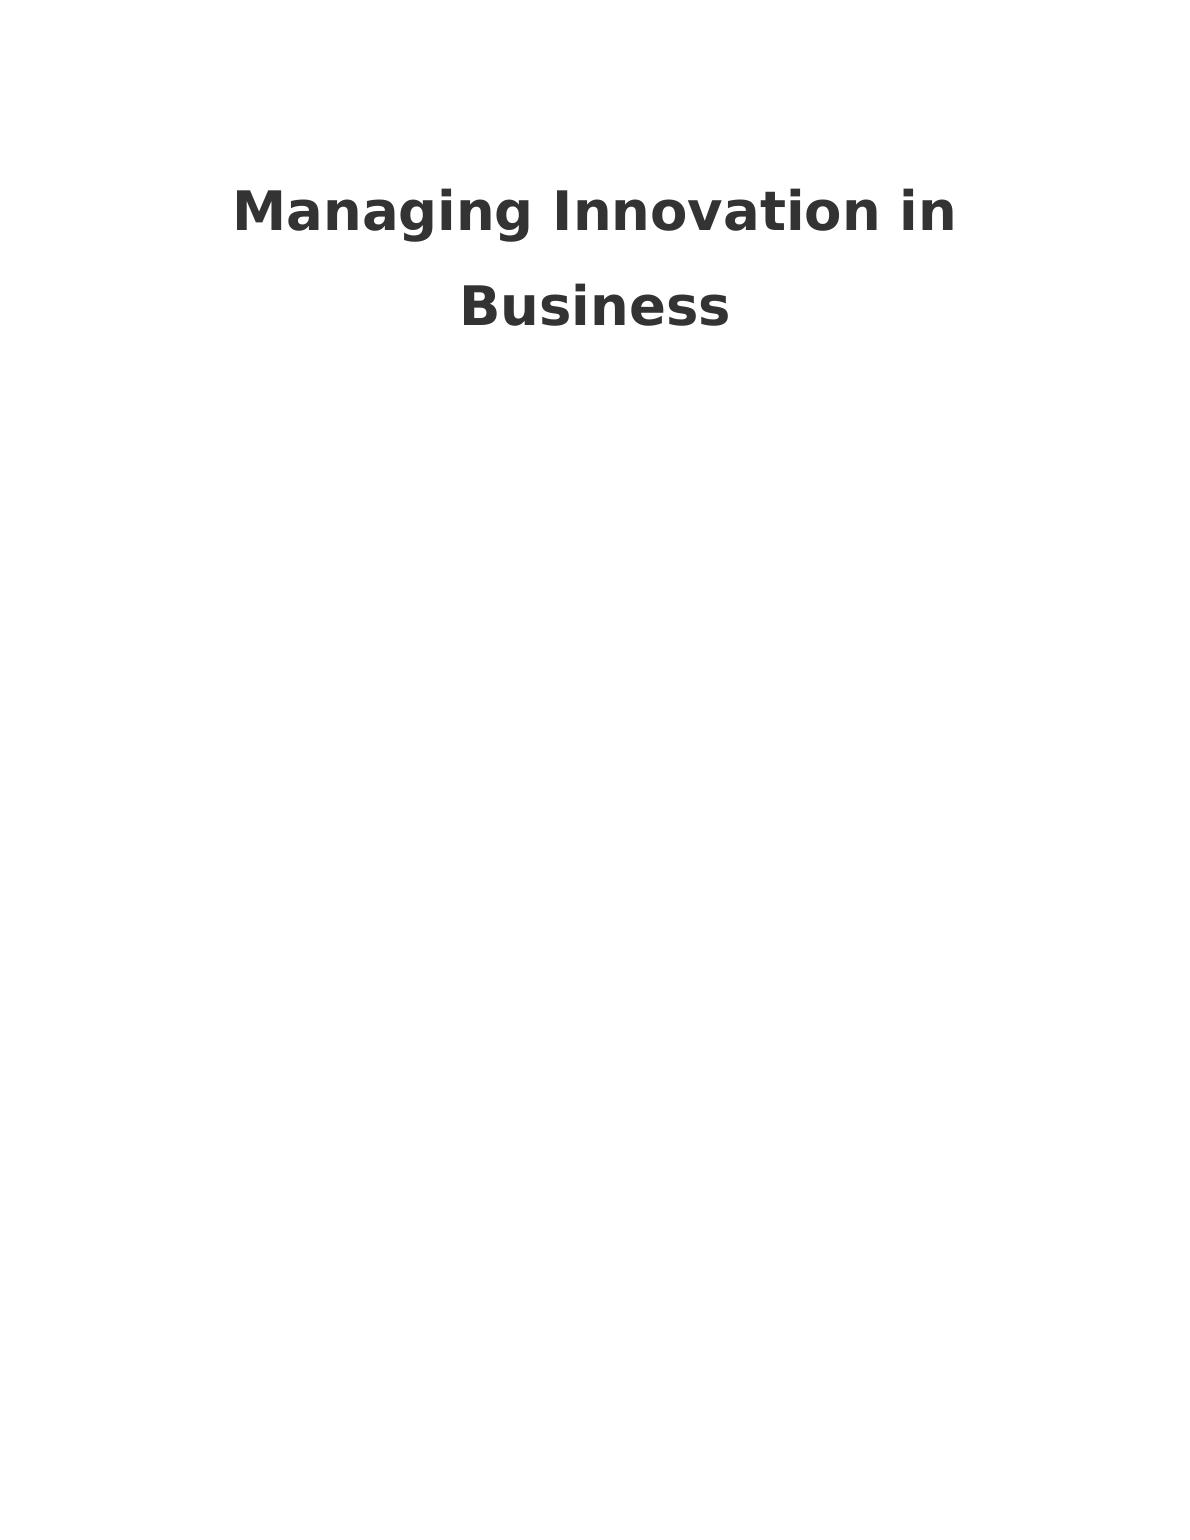 Managing Innovation in Business Assignment - Amazon company_1